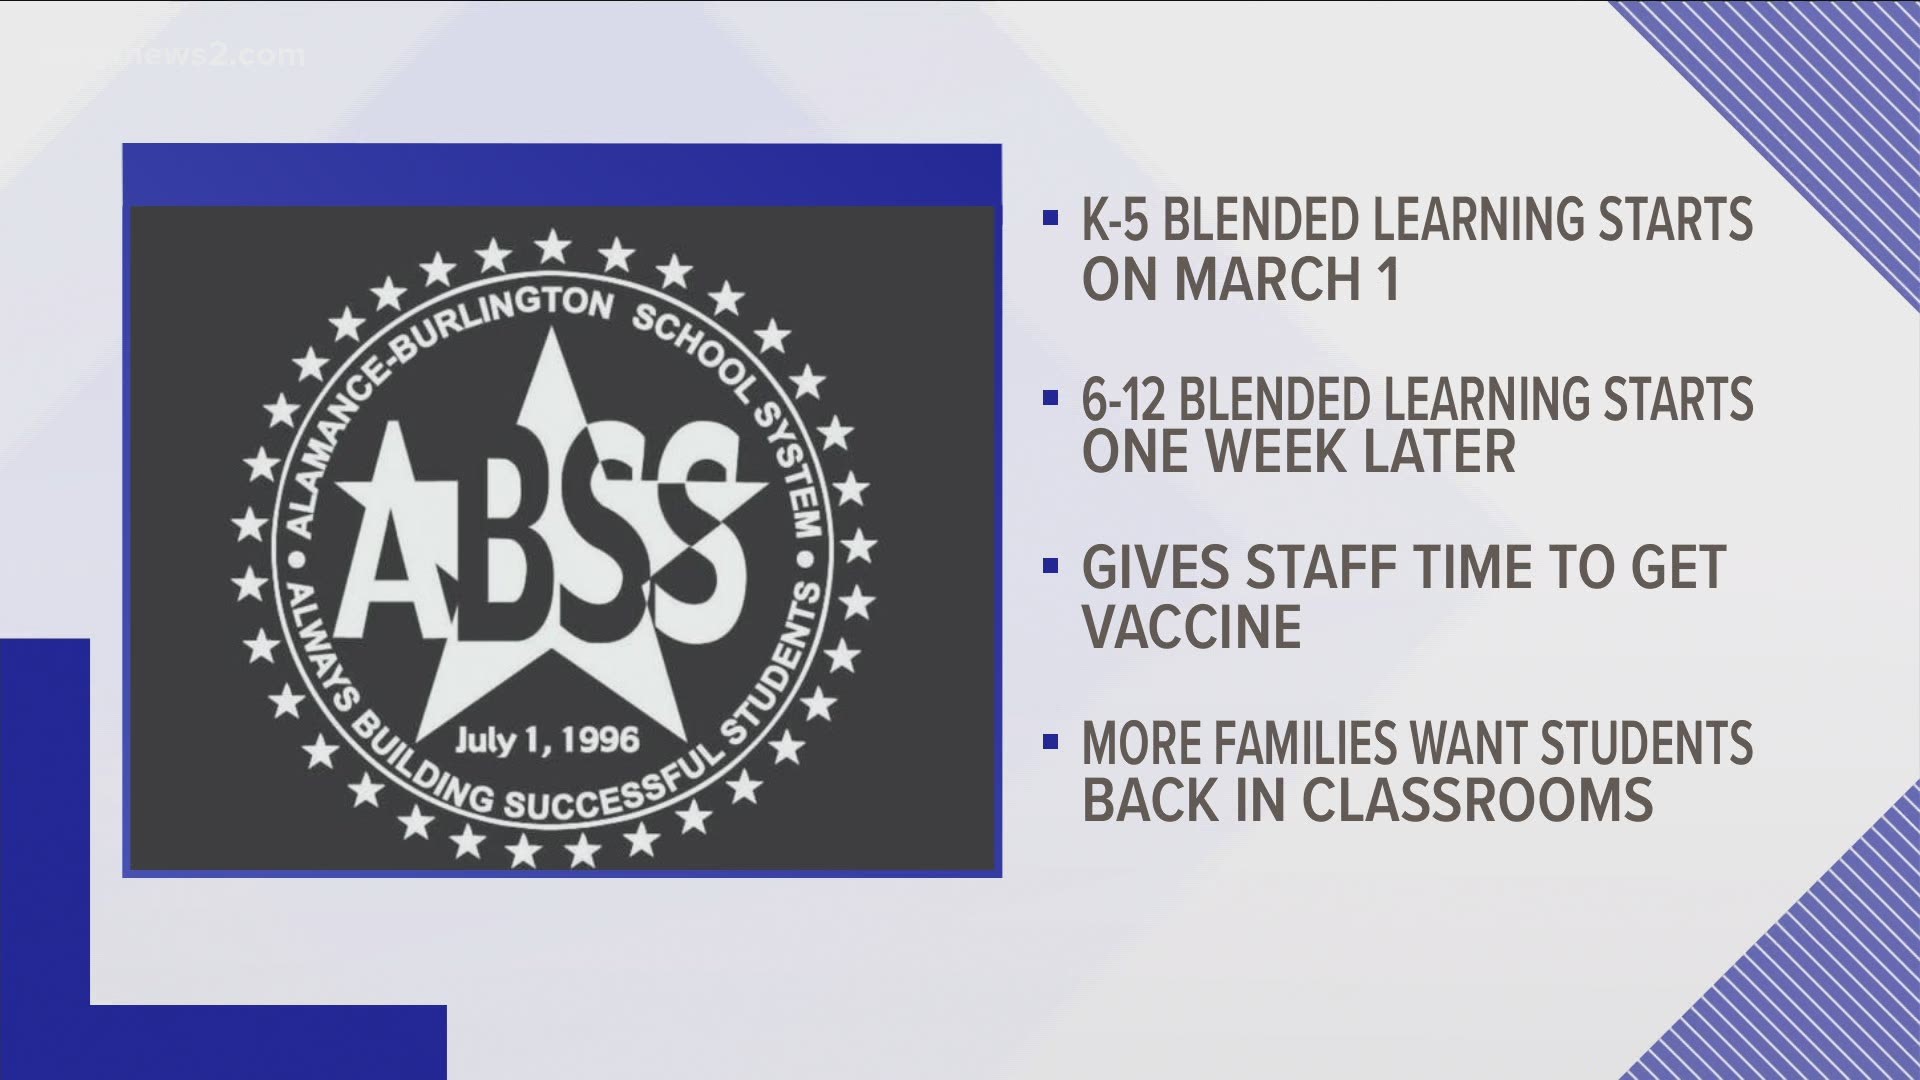 ABSS students will no longer return to classrooms in February. The district says the change gives teachers time to get vaccinated.